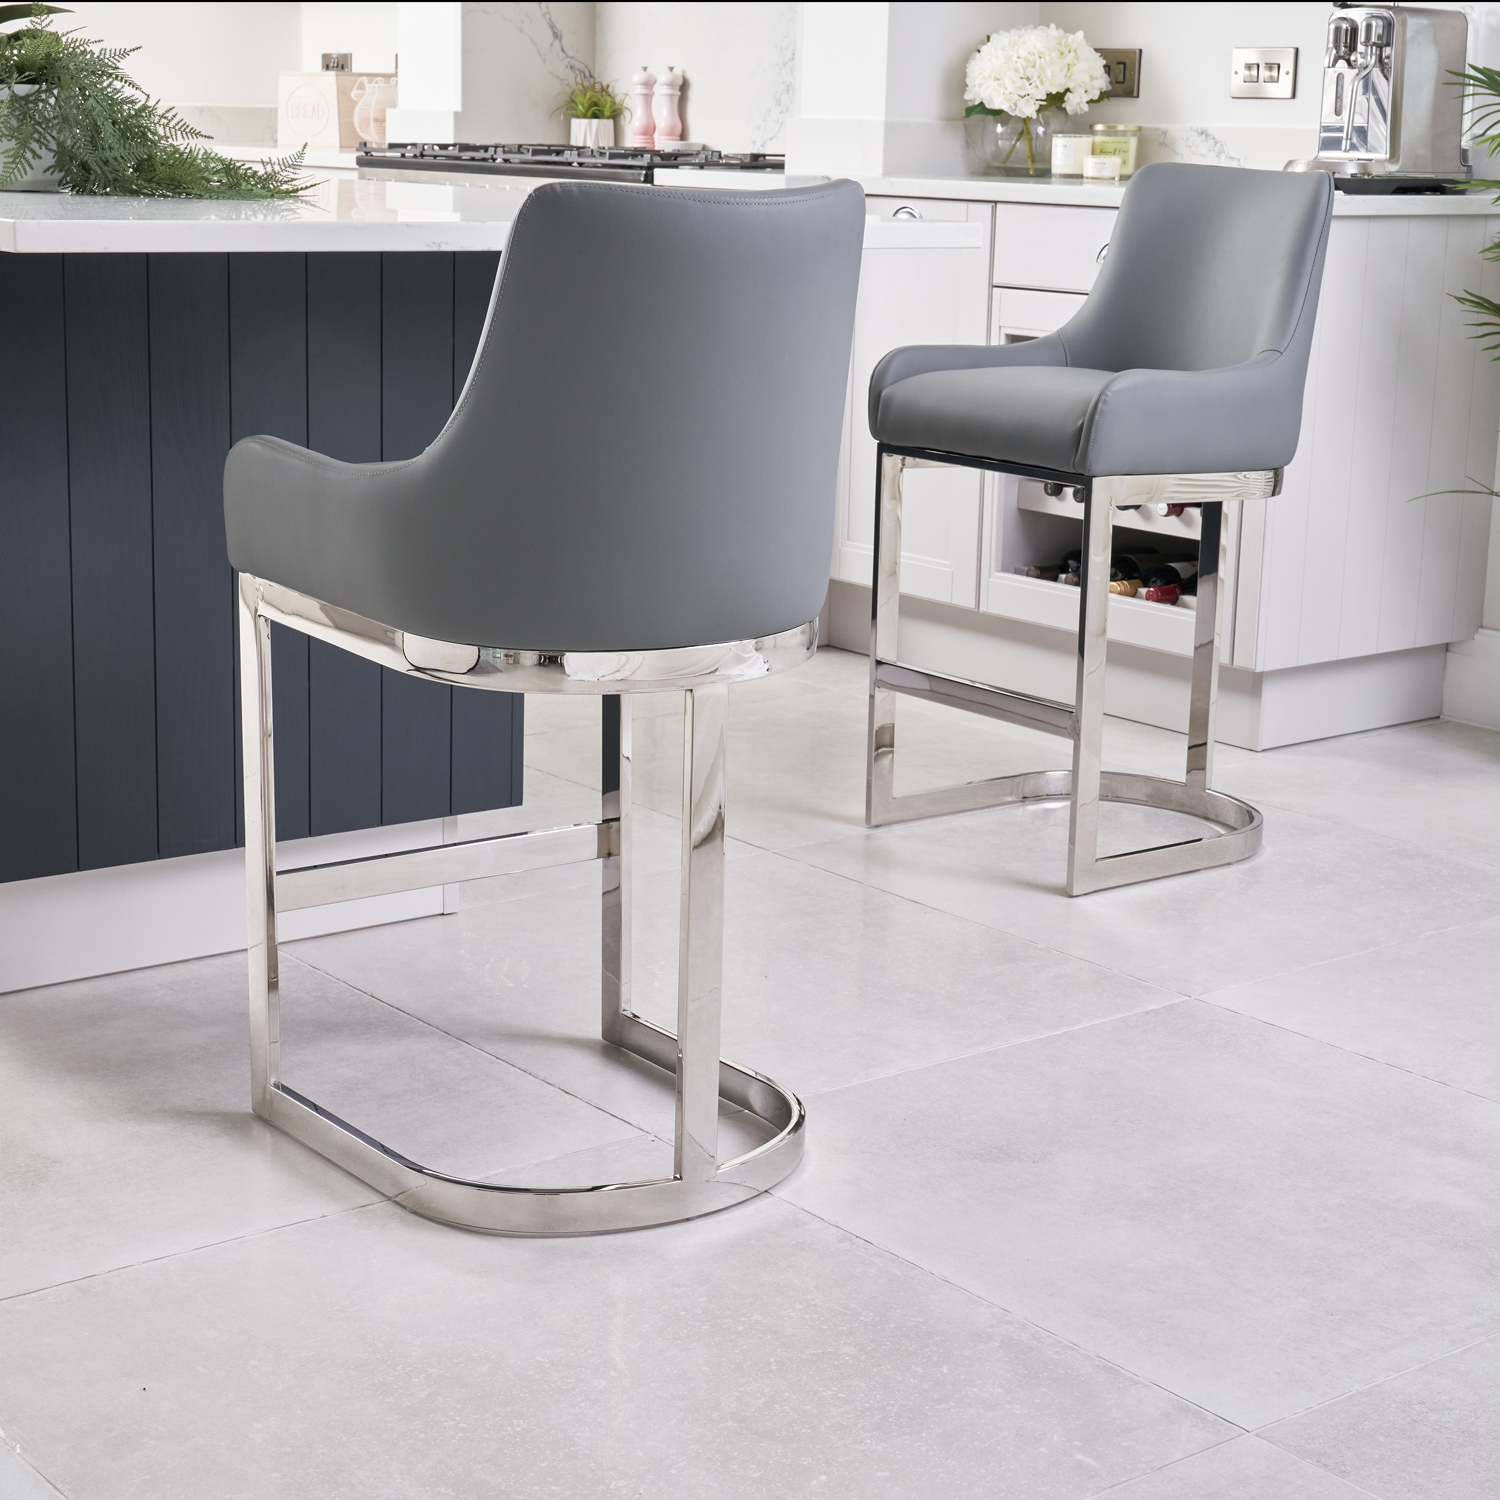 Clara Grey Faux Leather Counter Kitchen Barstool with a Stainless Steel Frame